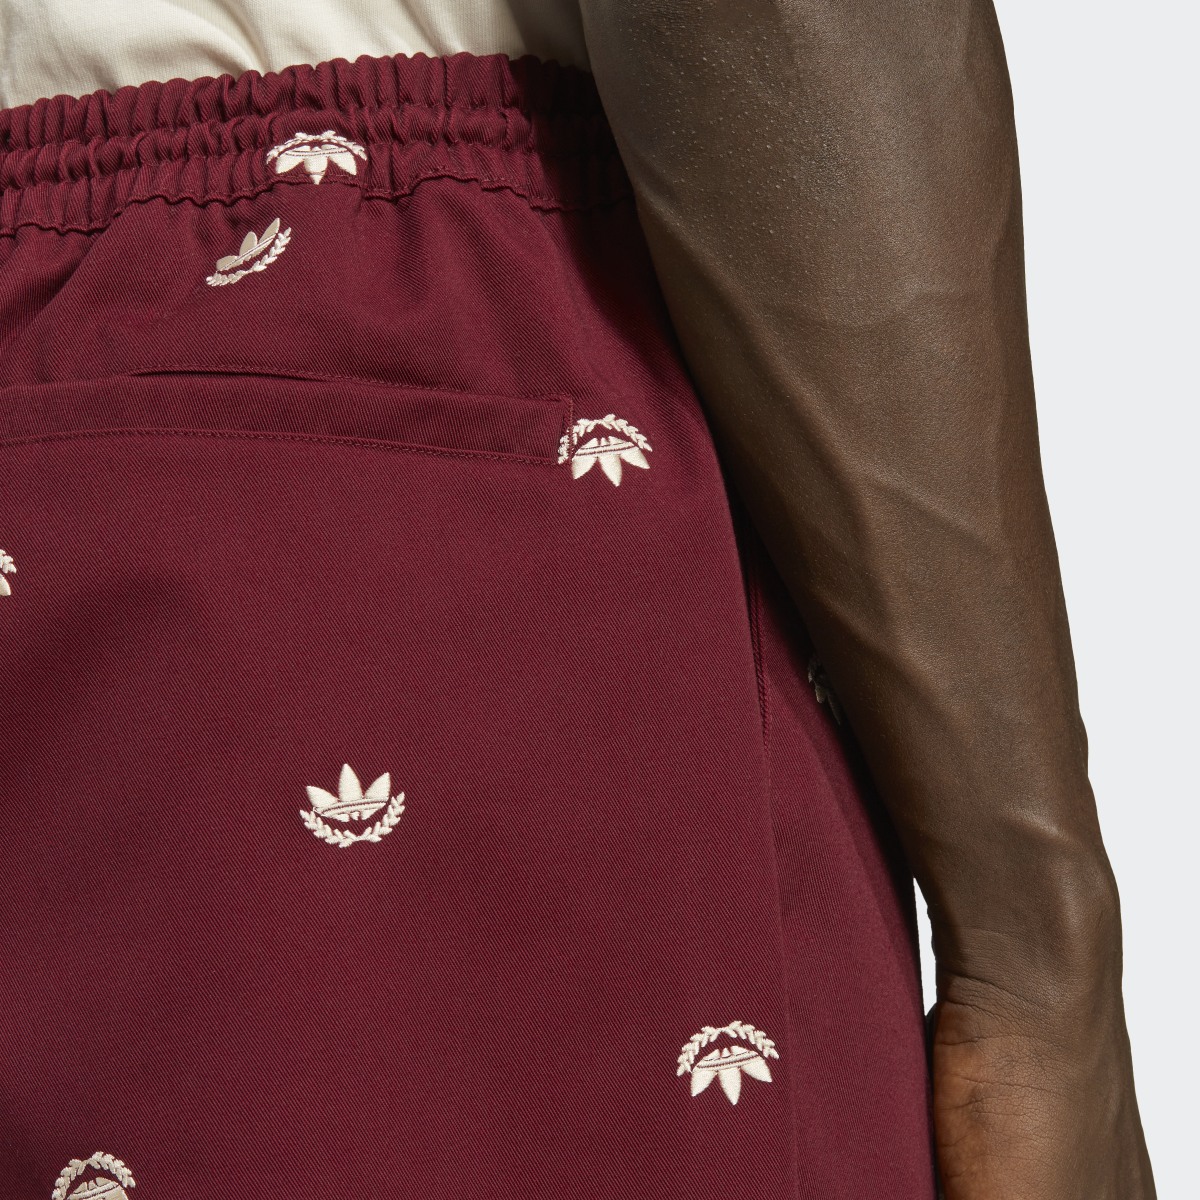 Adidas Graphics Archive Chino Trousers. 6